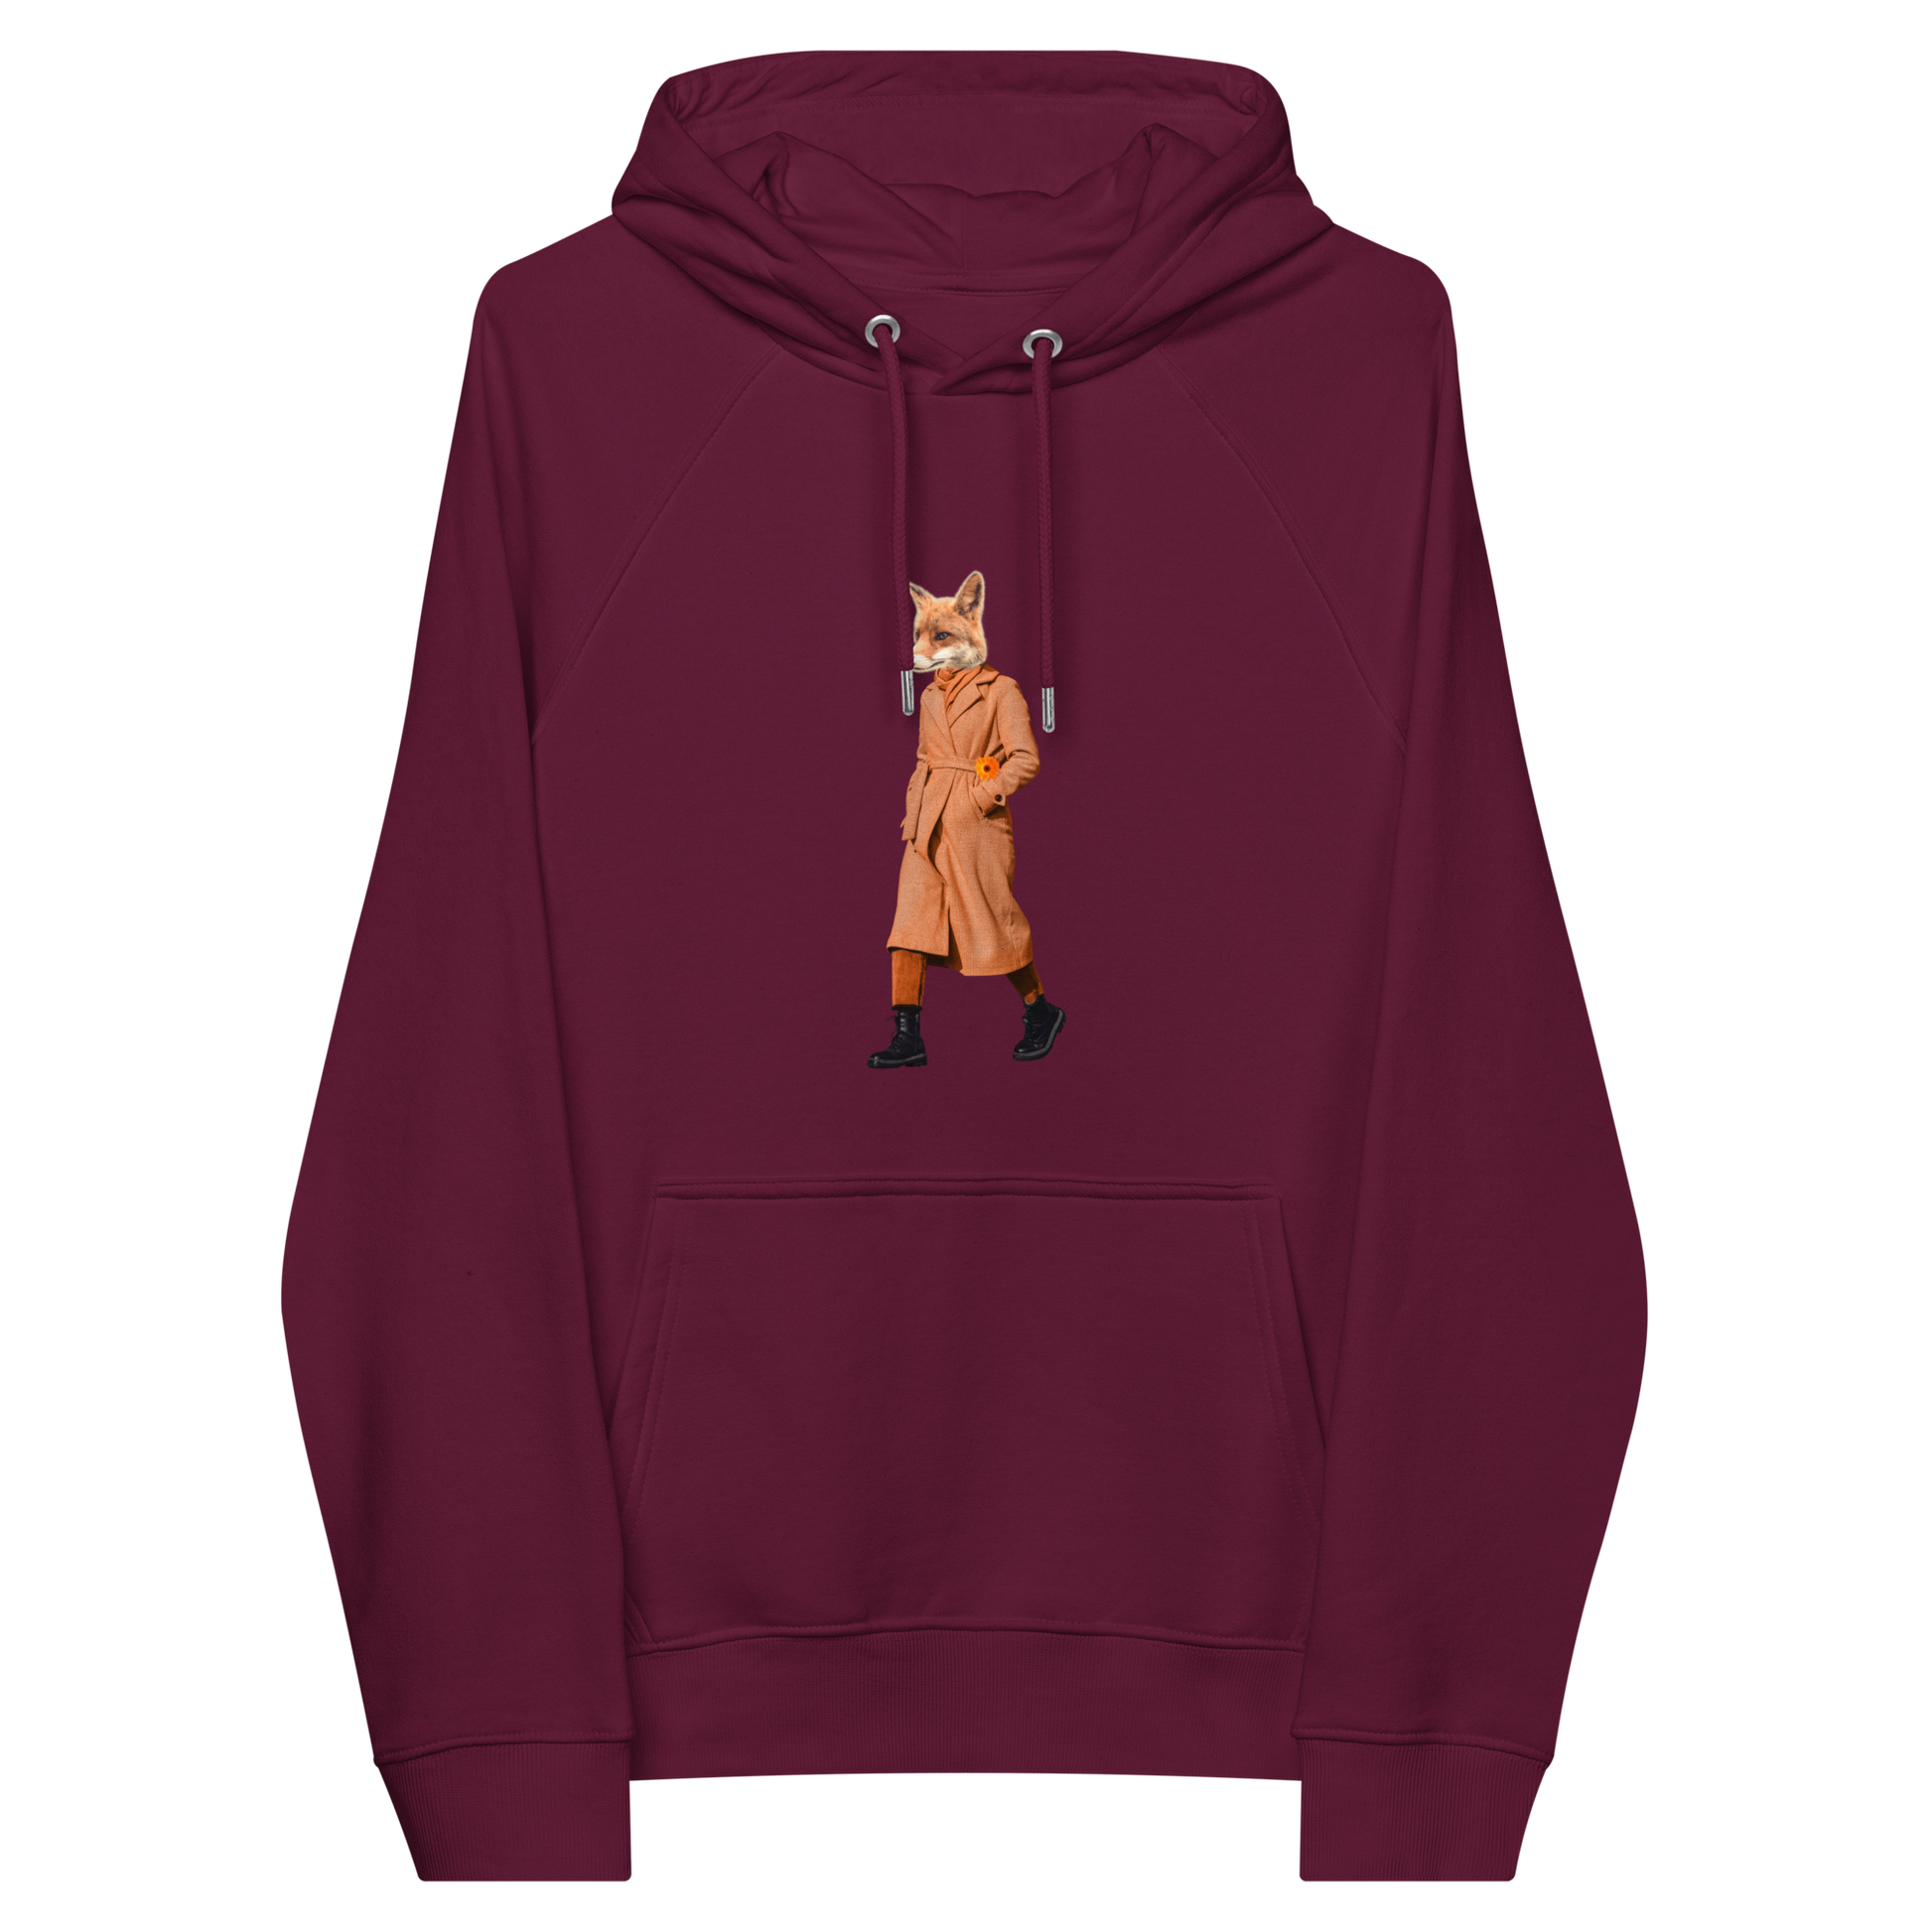 Burgundy Anthropomorphic Fox Raglan Hoodie featuring a sly Anthropomorphic Fox in a Trench Coat graphic on the chest - Funny Graphic Fox Hoodies - Boozy Fox